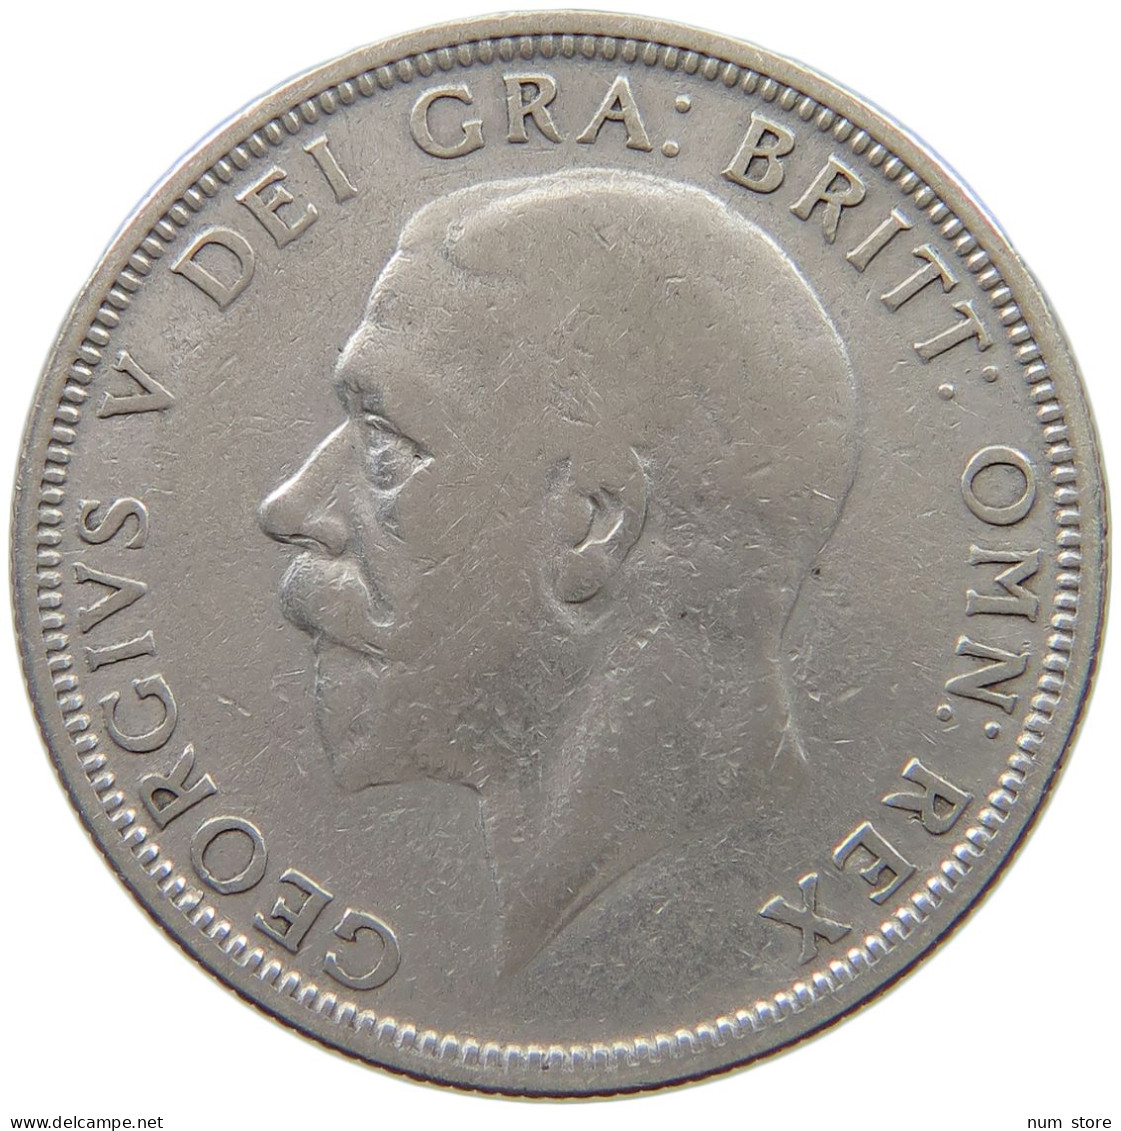 GREAT BRITAIN FLORIN 1931 George V. (1910-1936) #a090 0695 - J. 1 Florin / 2 Shillings